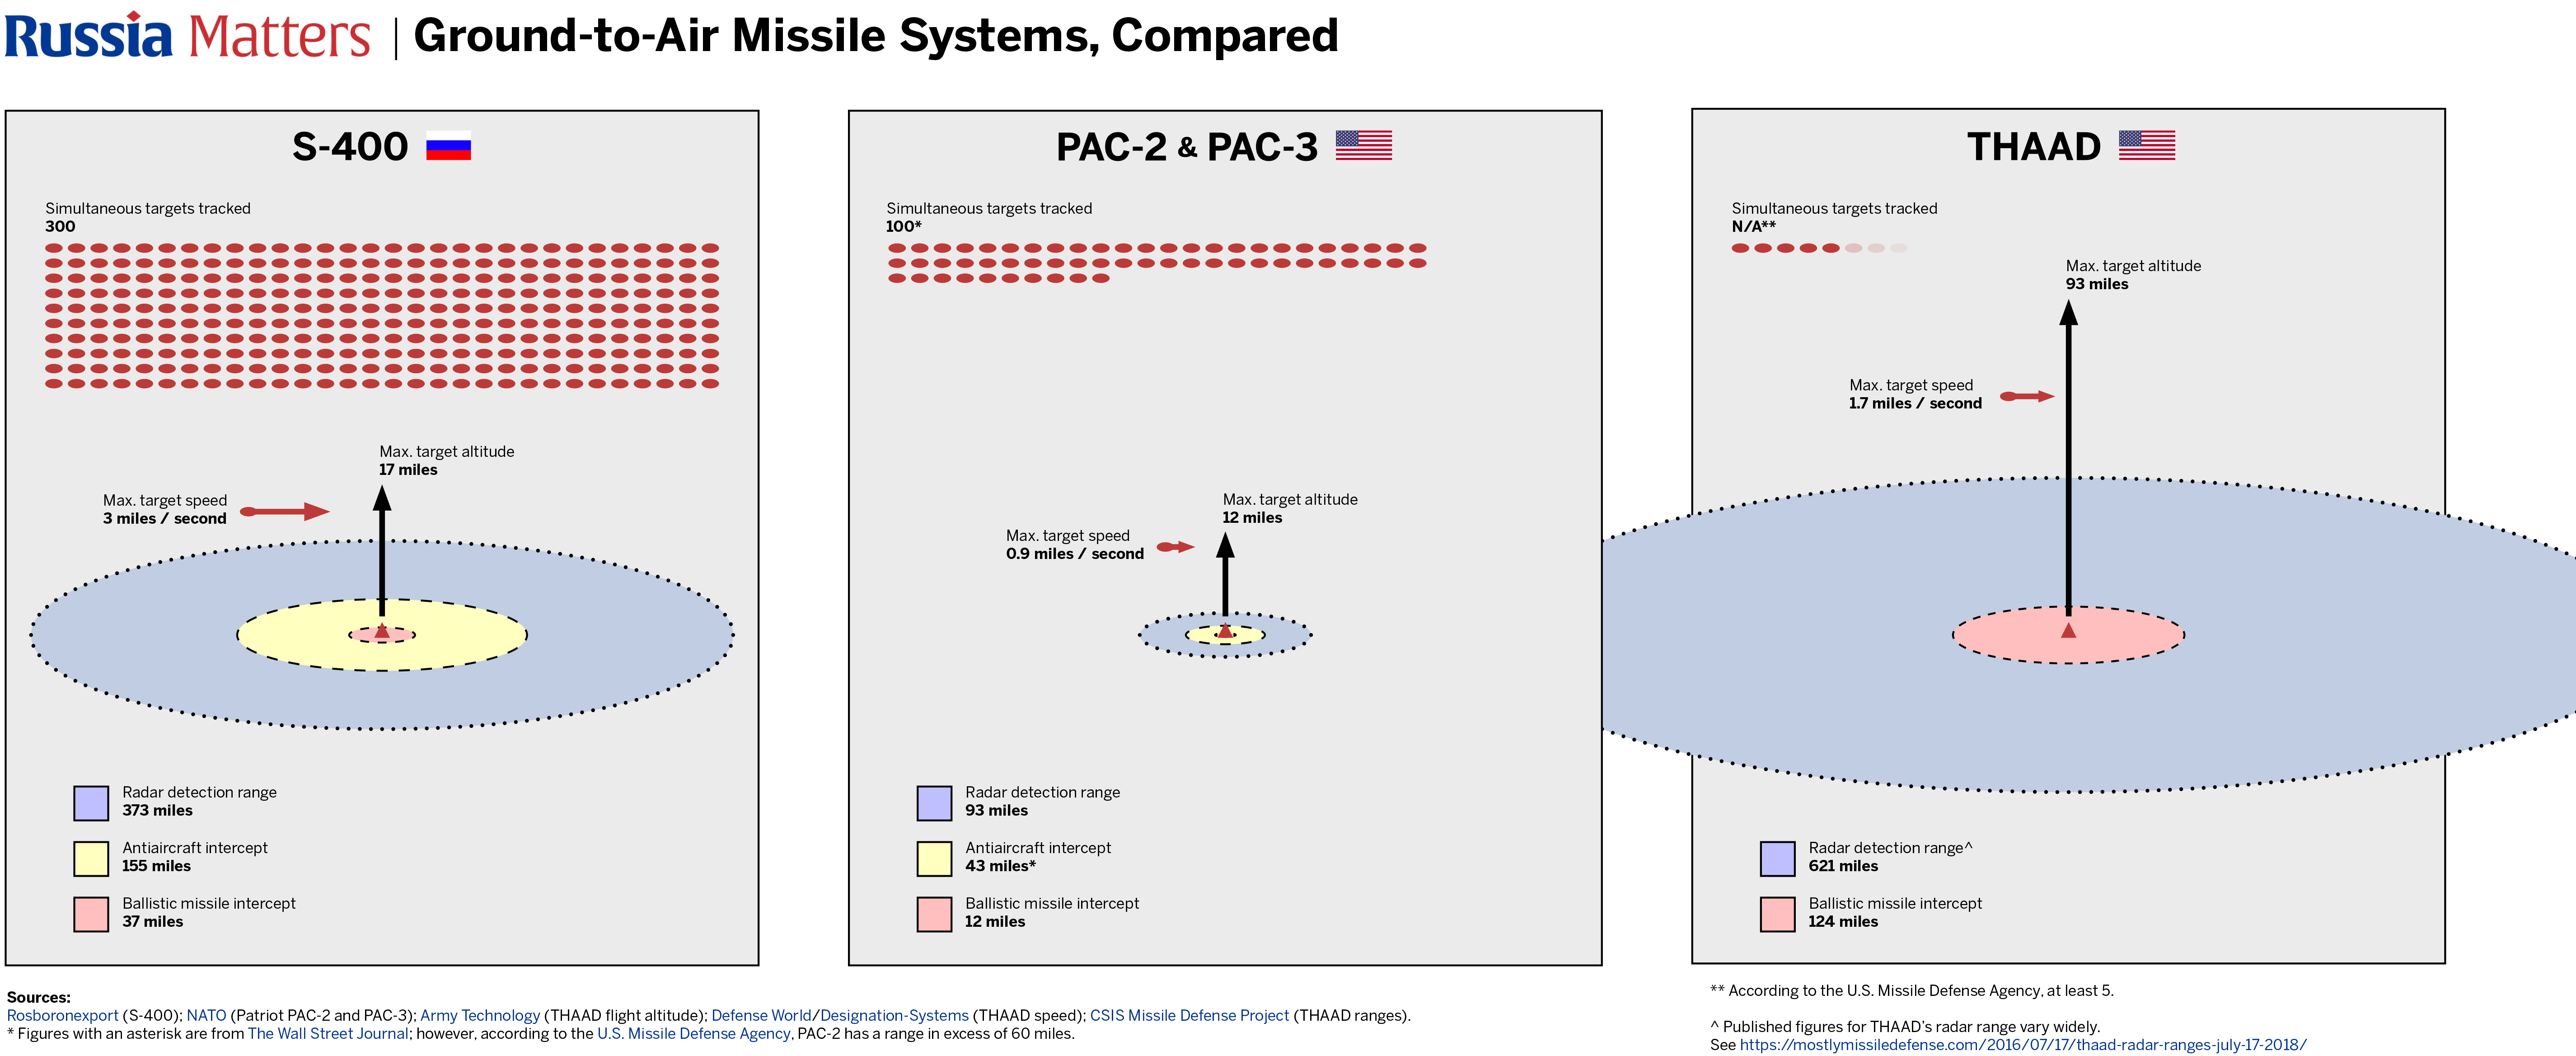 Missile systems compared